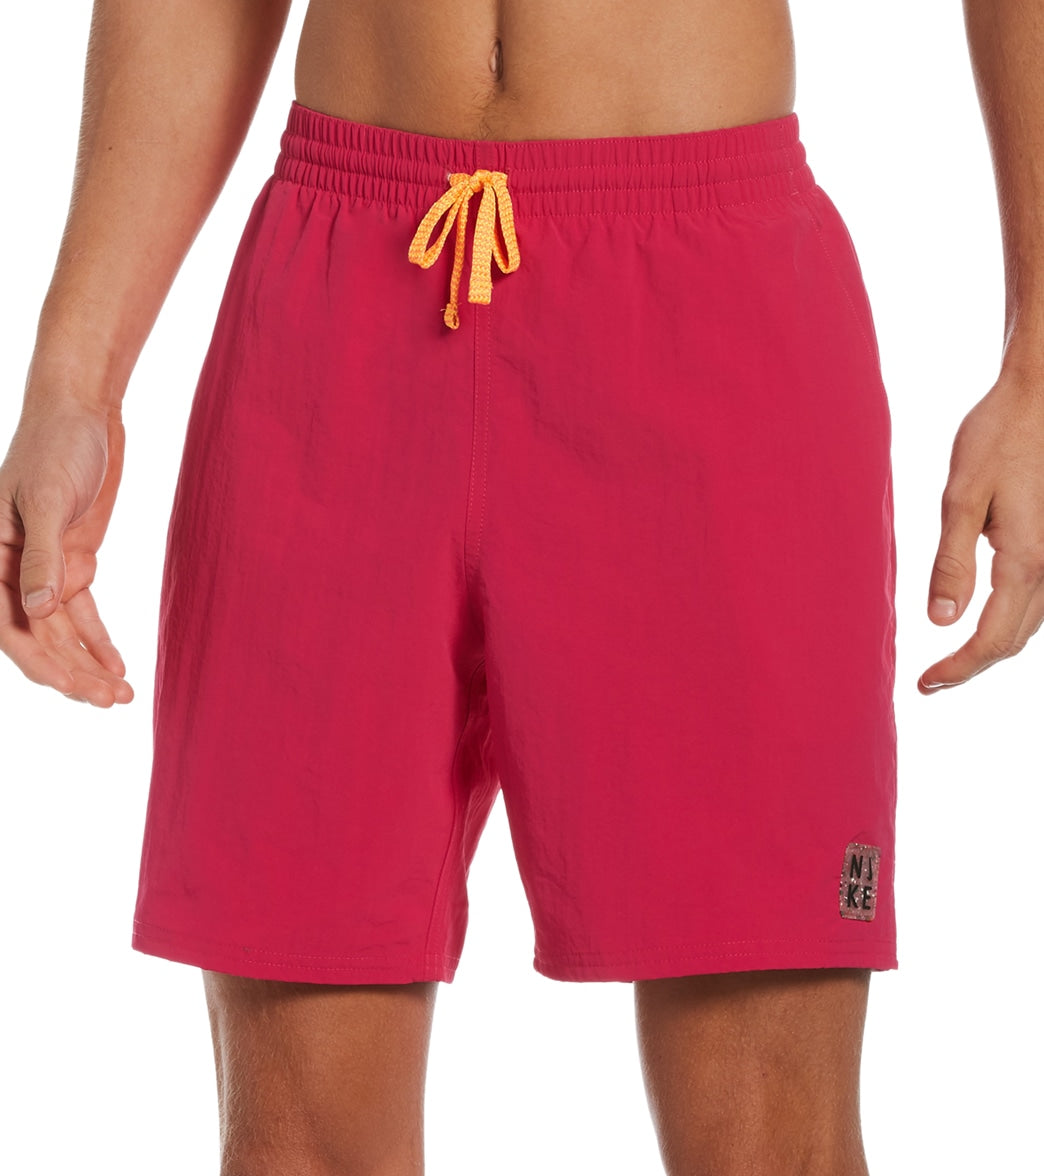 Nike Men's 18 Essential Volley Short - Fireberry Large - Swimoutlet.com